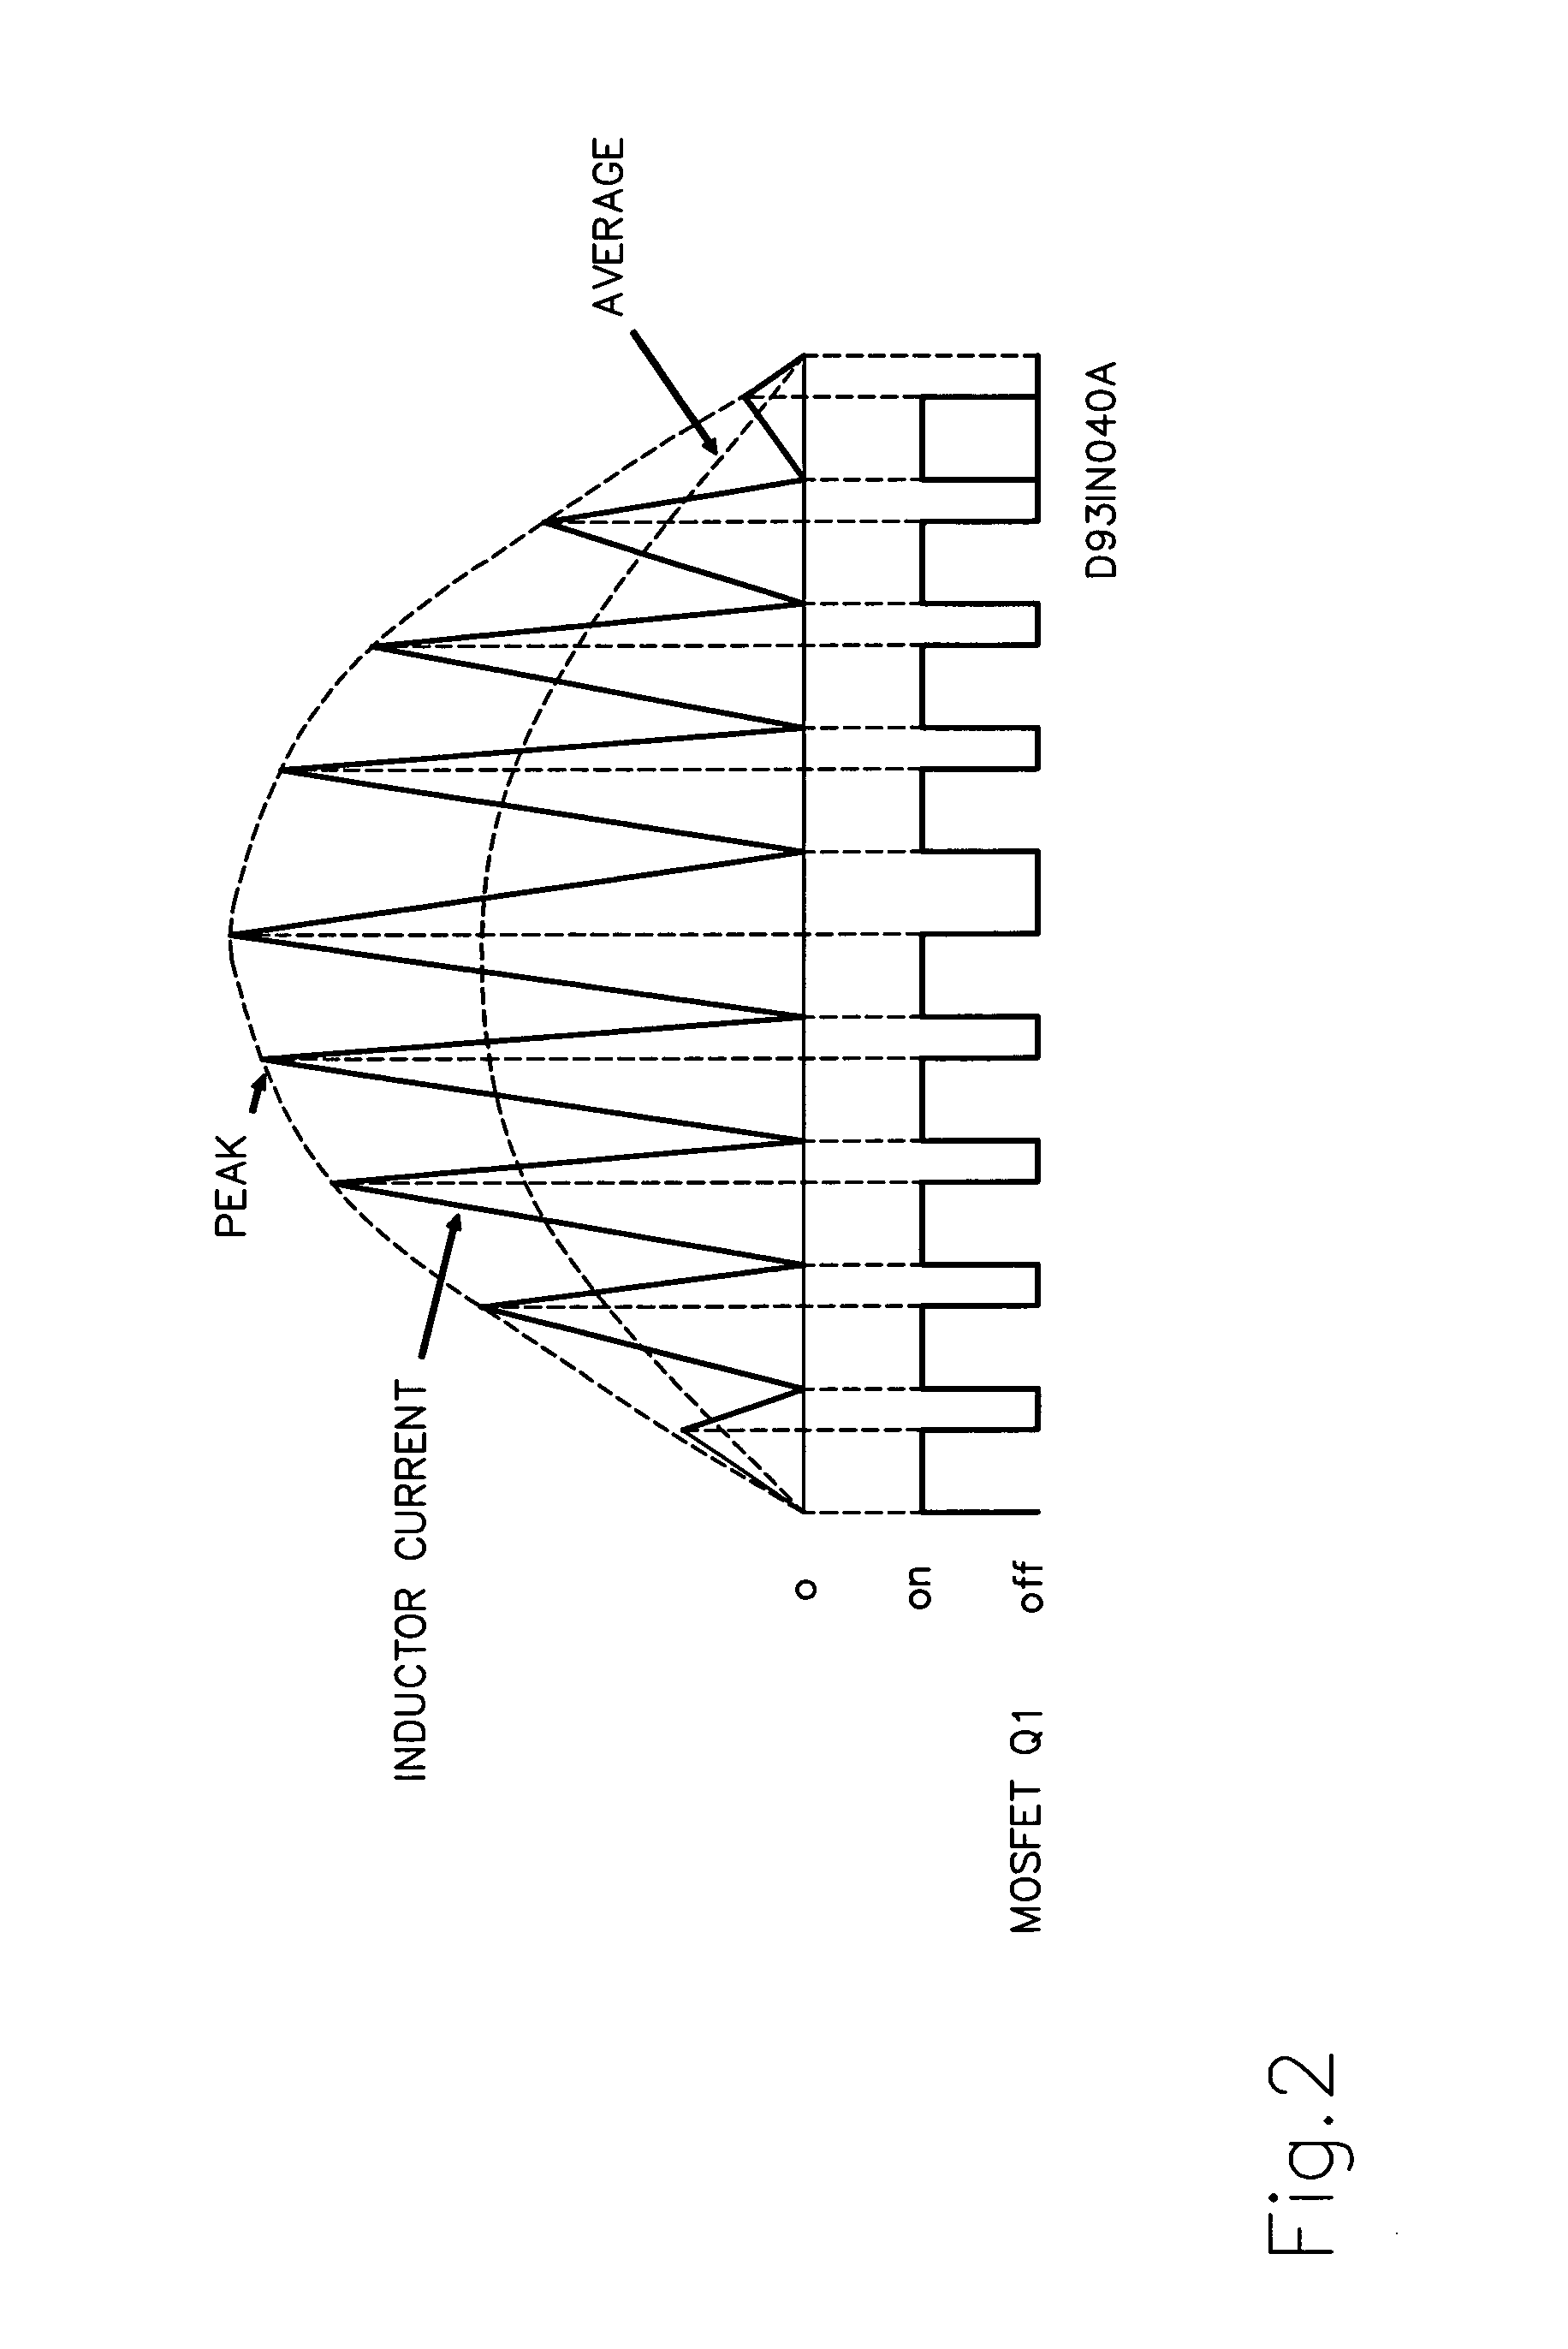 High efficiency power drive device enabling serial connection of light emitting diode lamps thereto